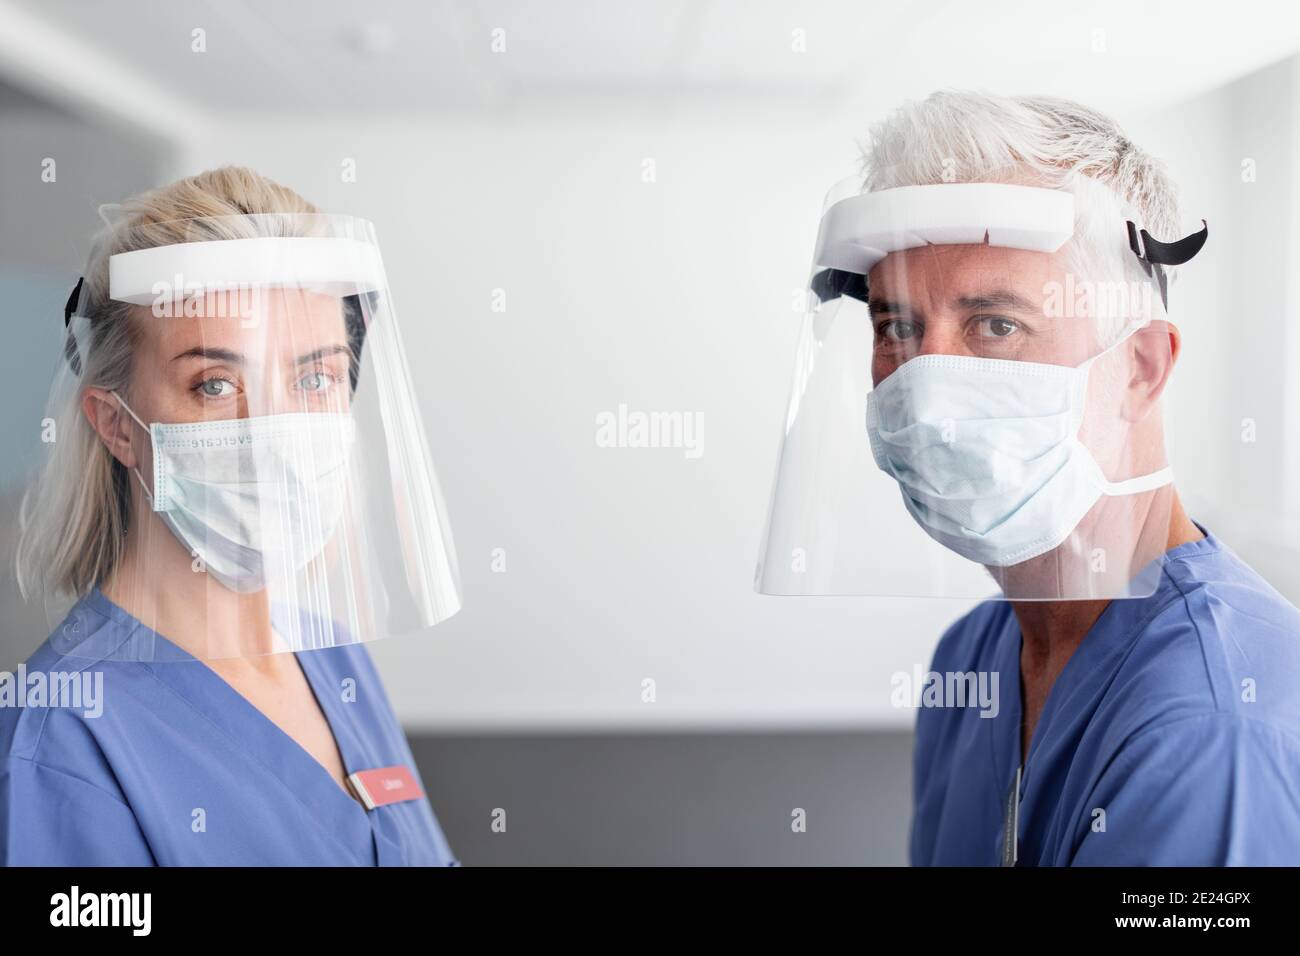 Doctors wearing personal protective equipment Stock Photo